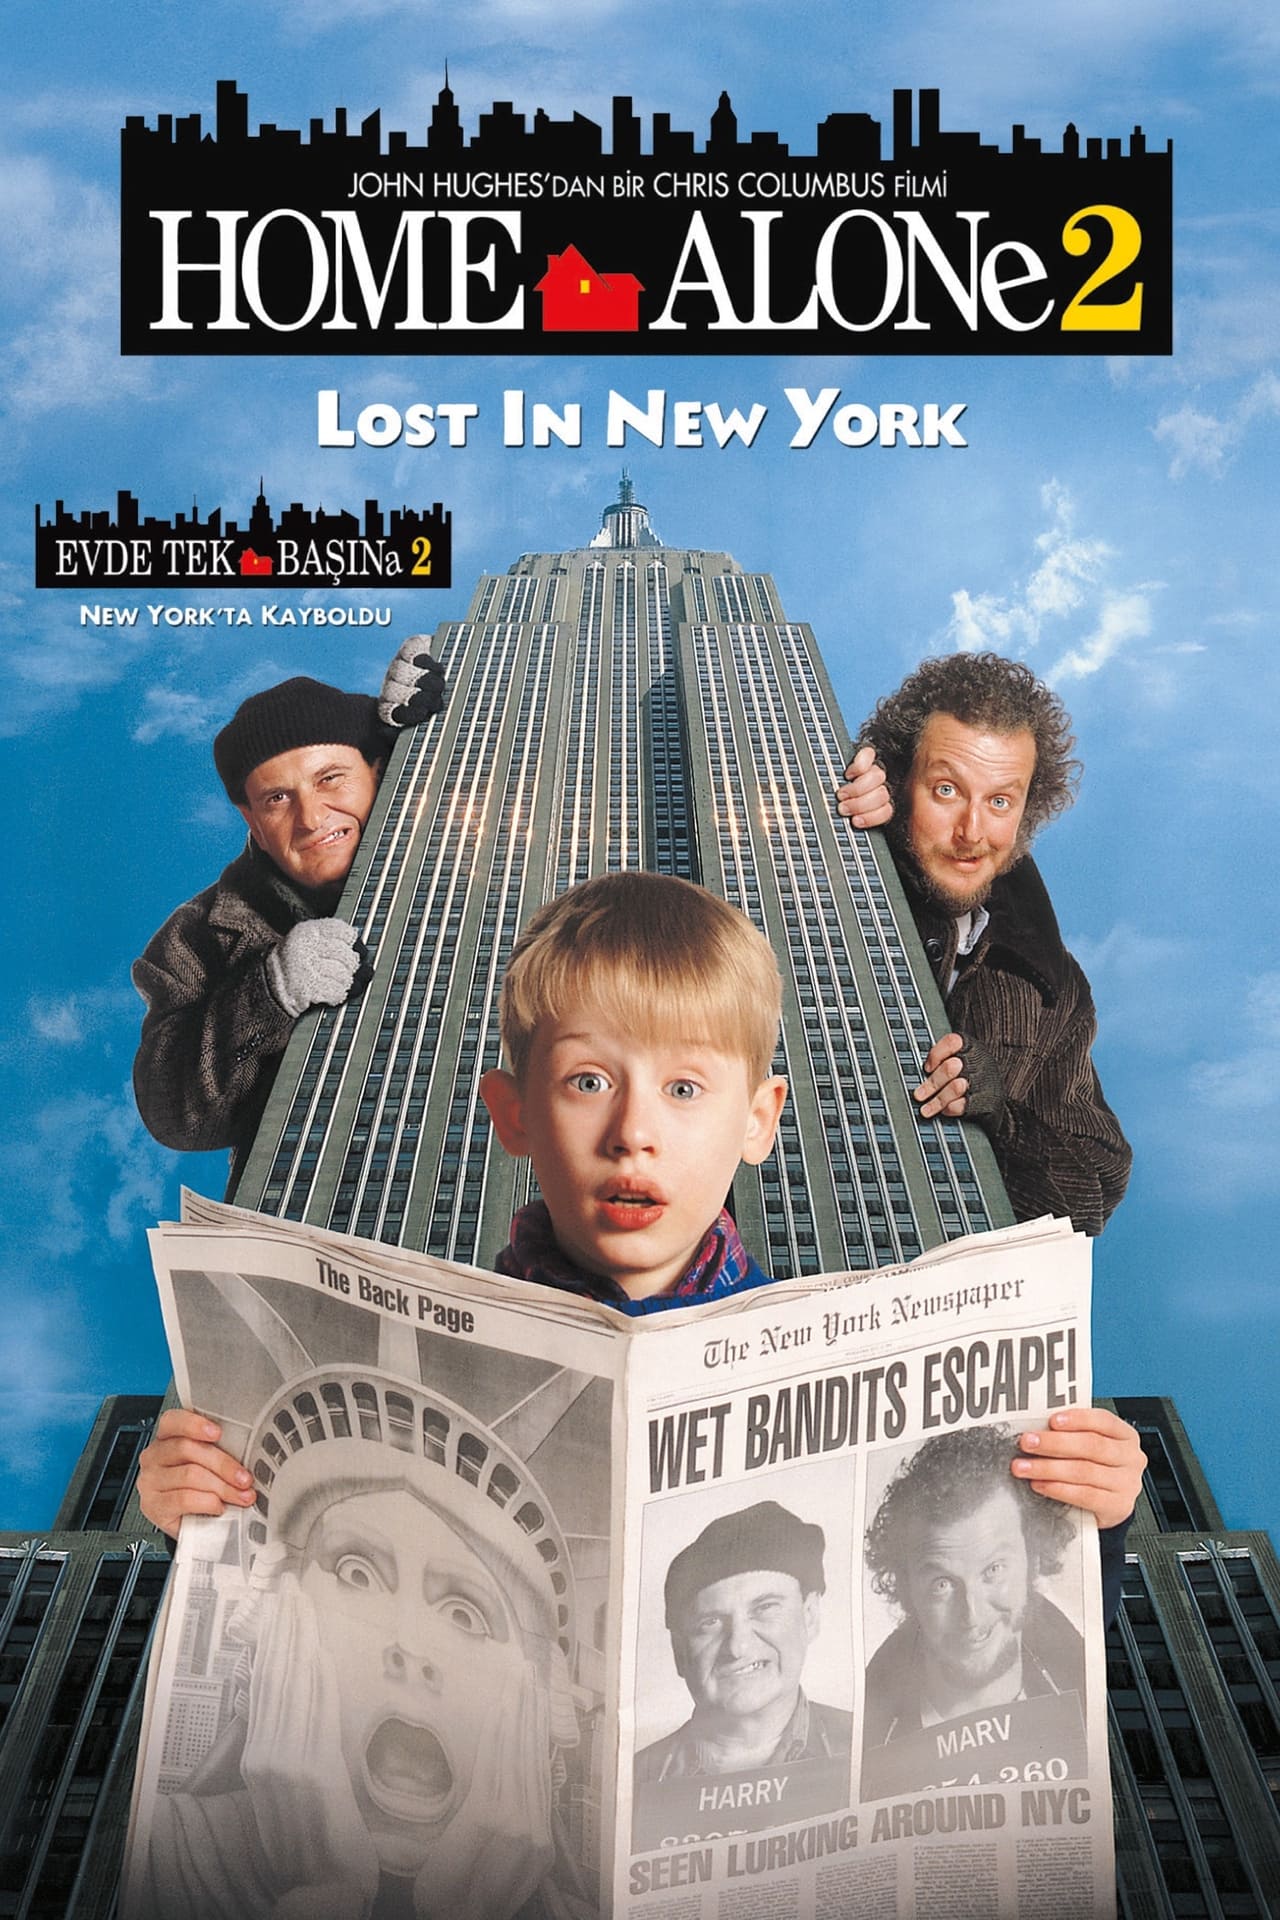 Home Alone 2: Lost in New York (1992) 128Kbps 23.976Fps 48Khz 2.0Ch DD+ NF E-AC3 Turkish Audio TAC